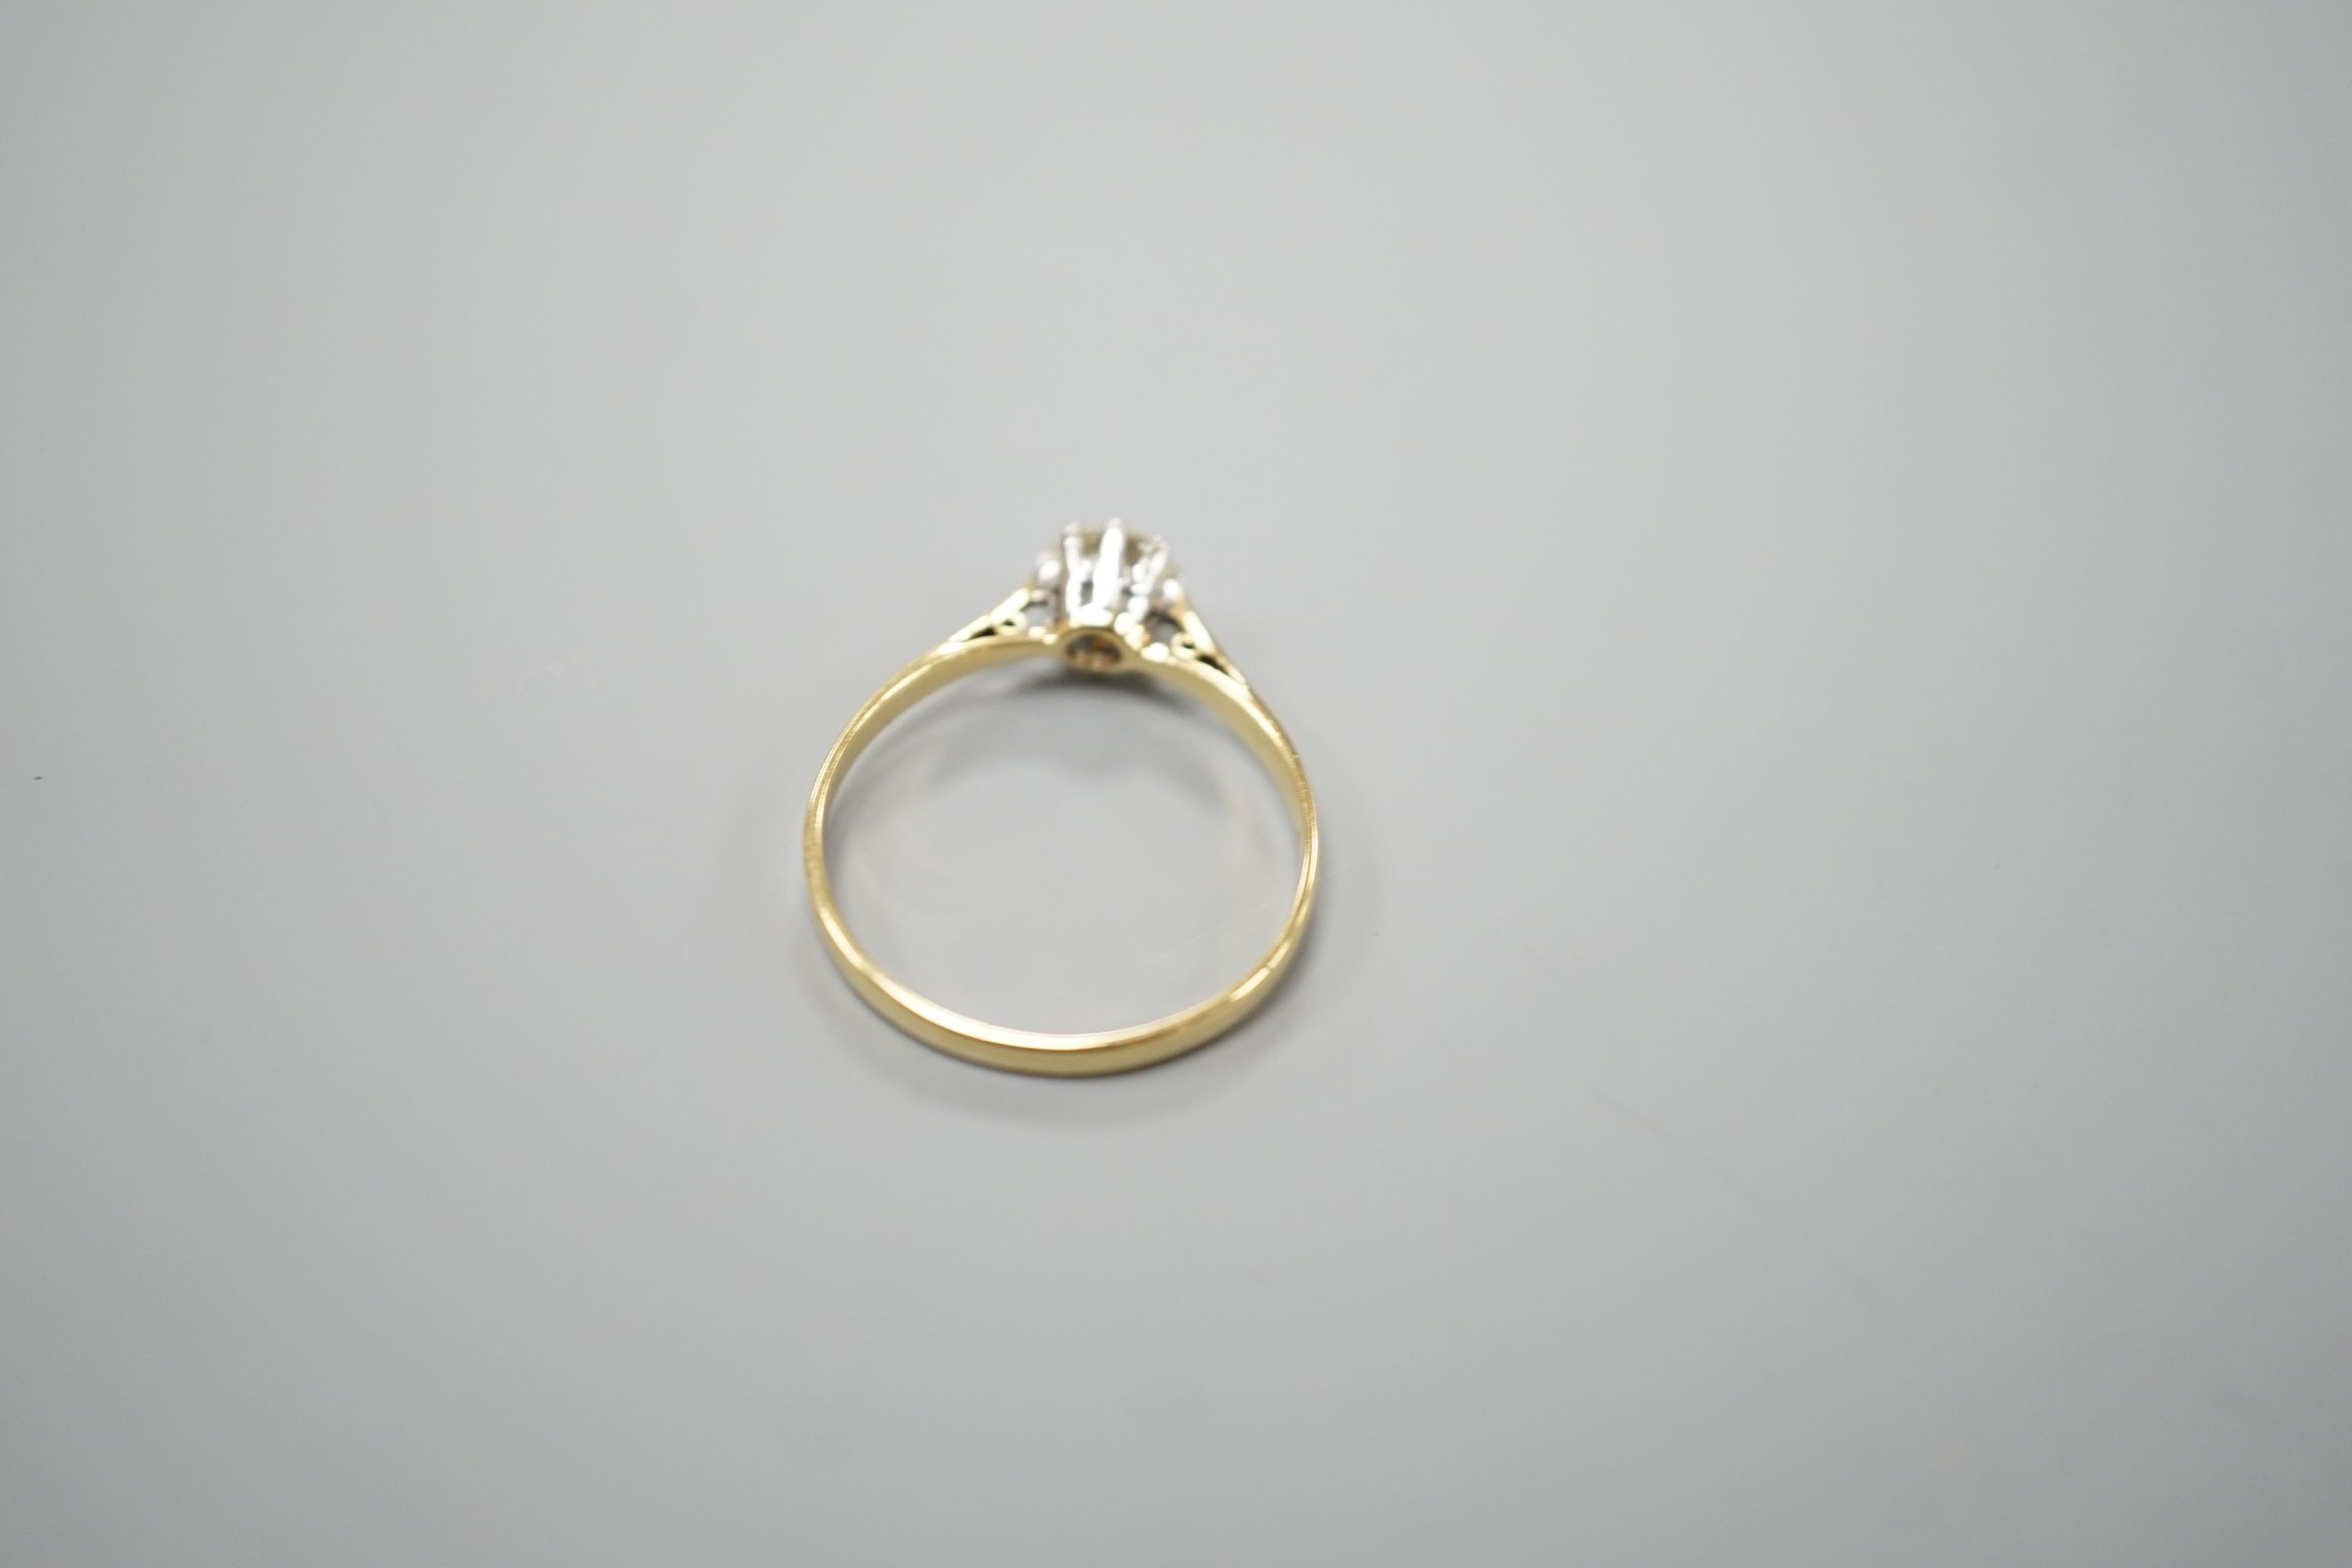 A yellow metal and simulated solitaire diamond ring, size O, gross weight 1.6 grams.